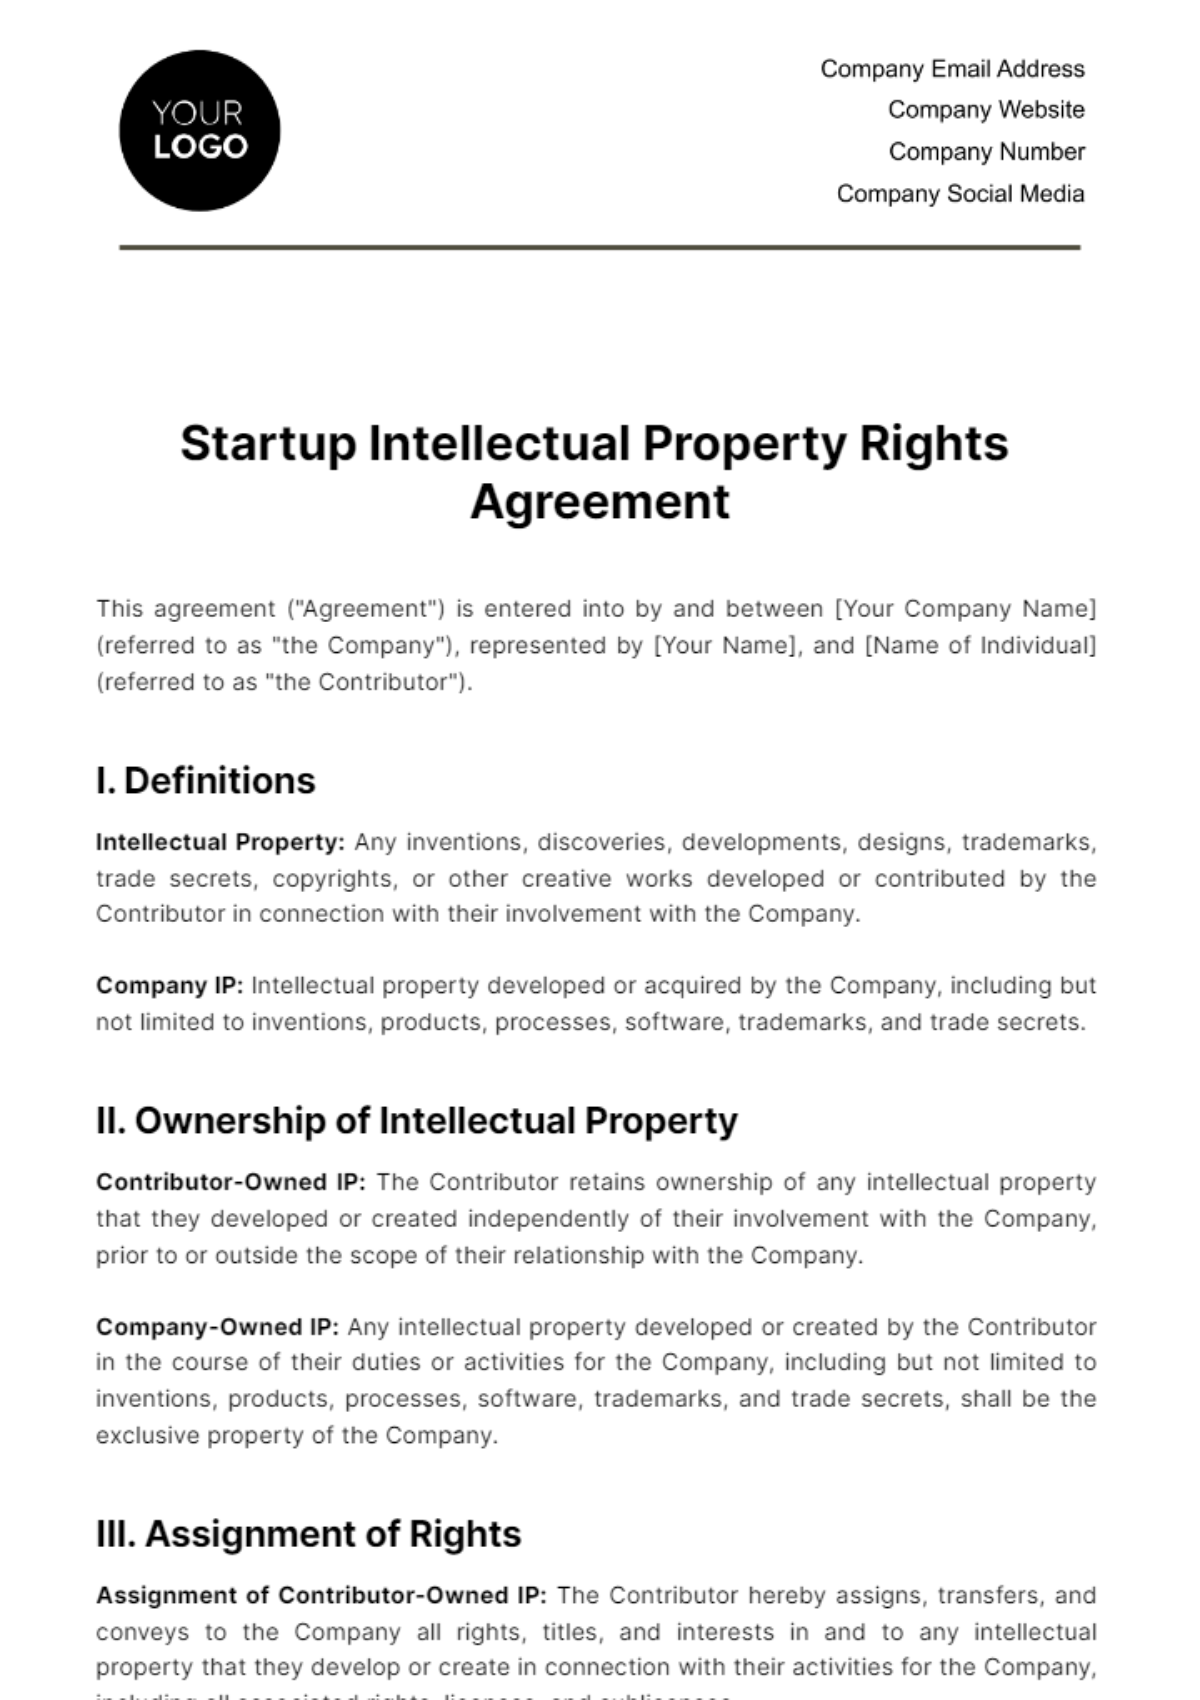 Startup Intellectual Property Rights Agreement Template